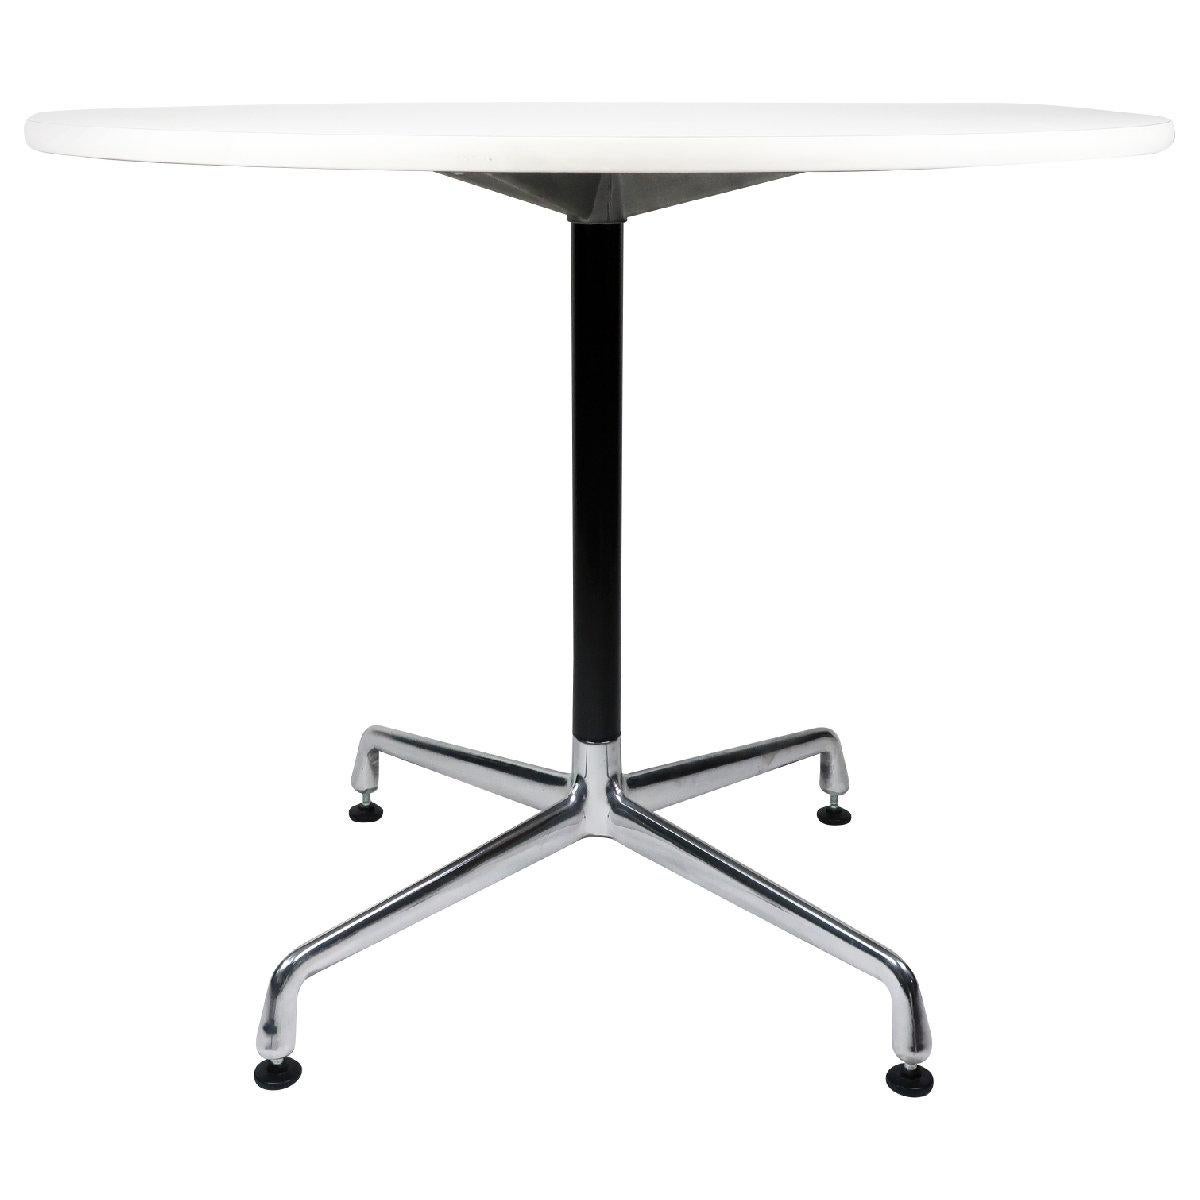 From Ray & Charles Eames’ iconic Aluminum Group collection for Herman Miller, this timeless Mid-Century Modern Classic is as much at home in a breakfast nook as in an office. With a 36” top, this is perfect for apartments and other smaller spaces.
